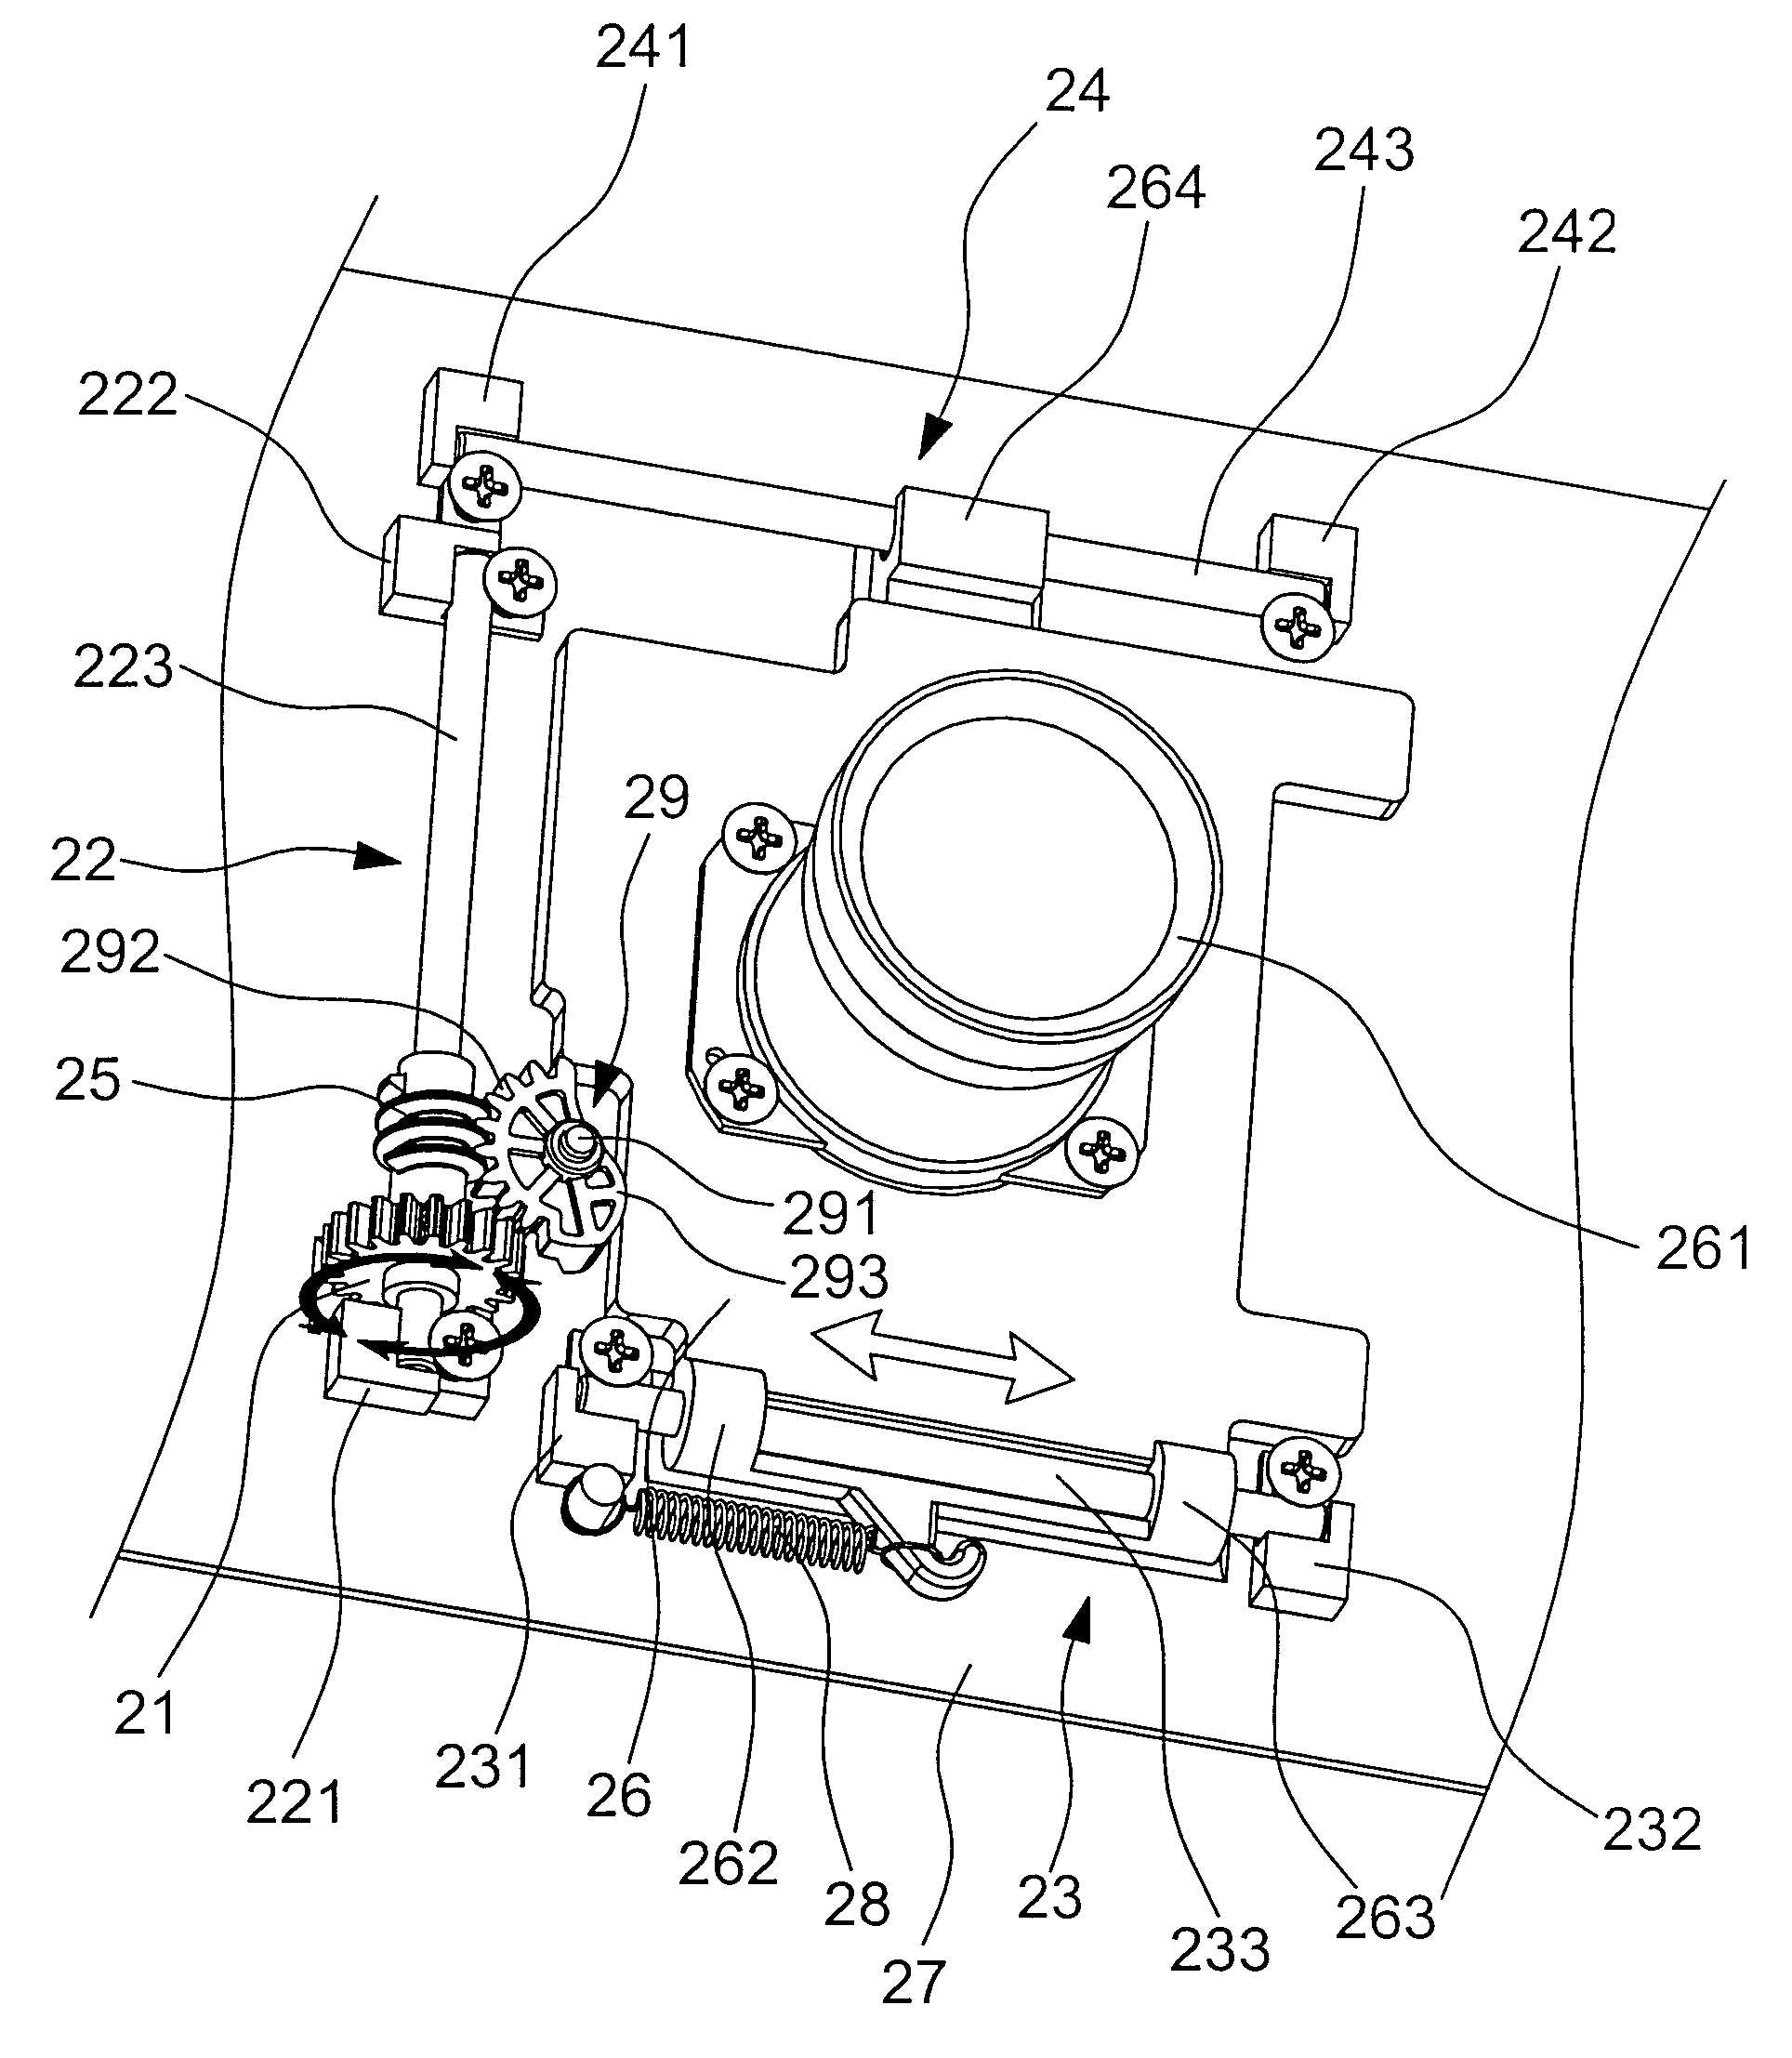 Projection lens shifting mechanism